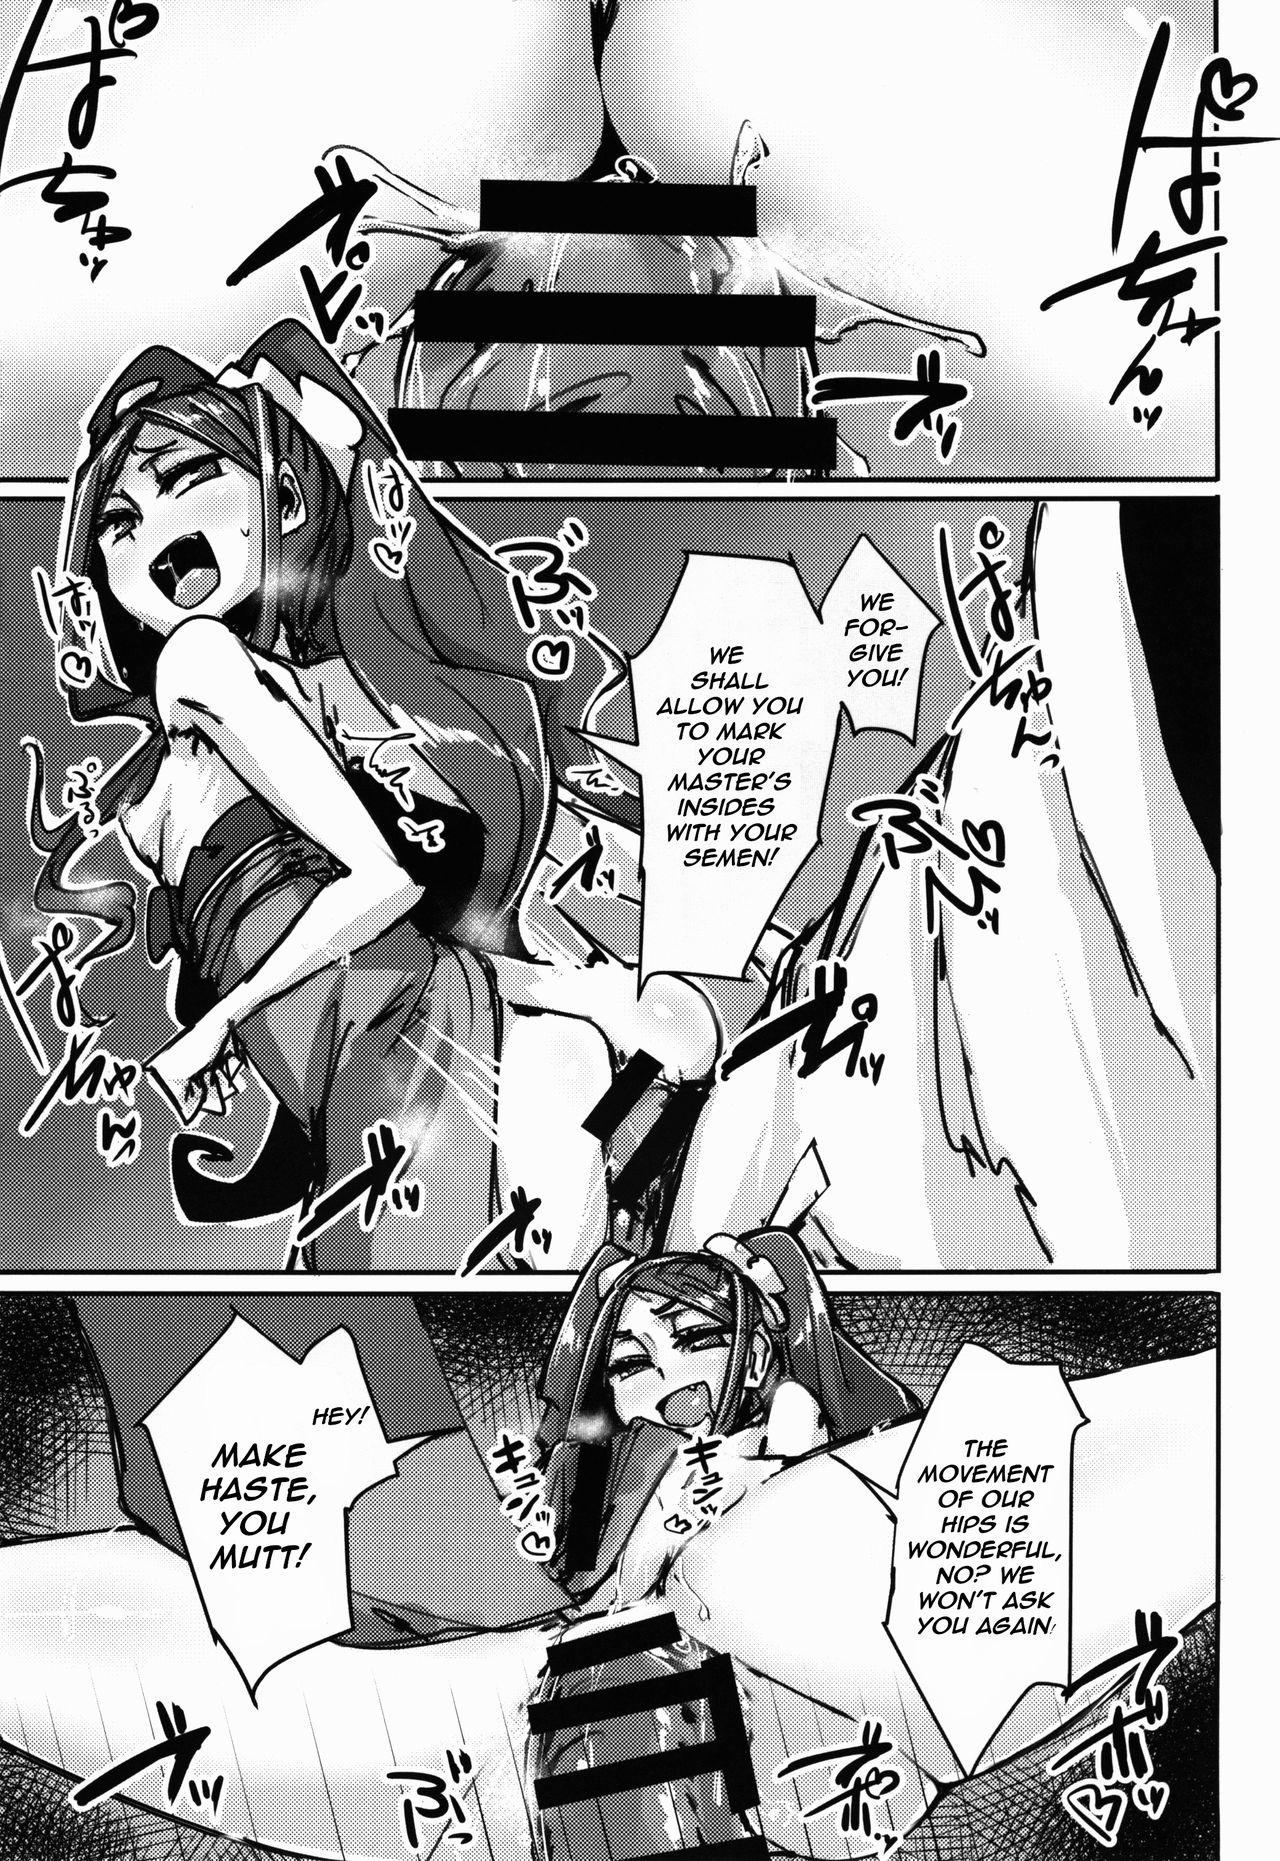 Hot Naked Girl AssAssIN - Fate grand order Whatsapp - Page 12